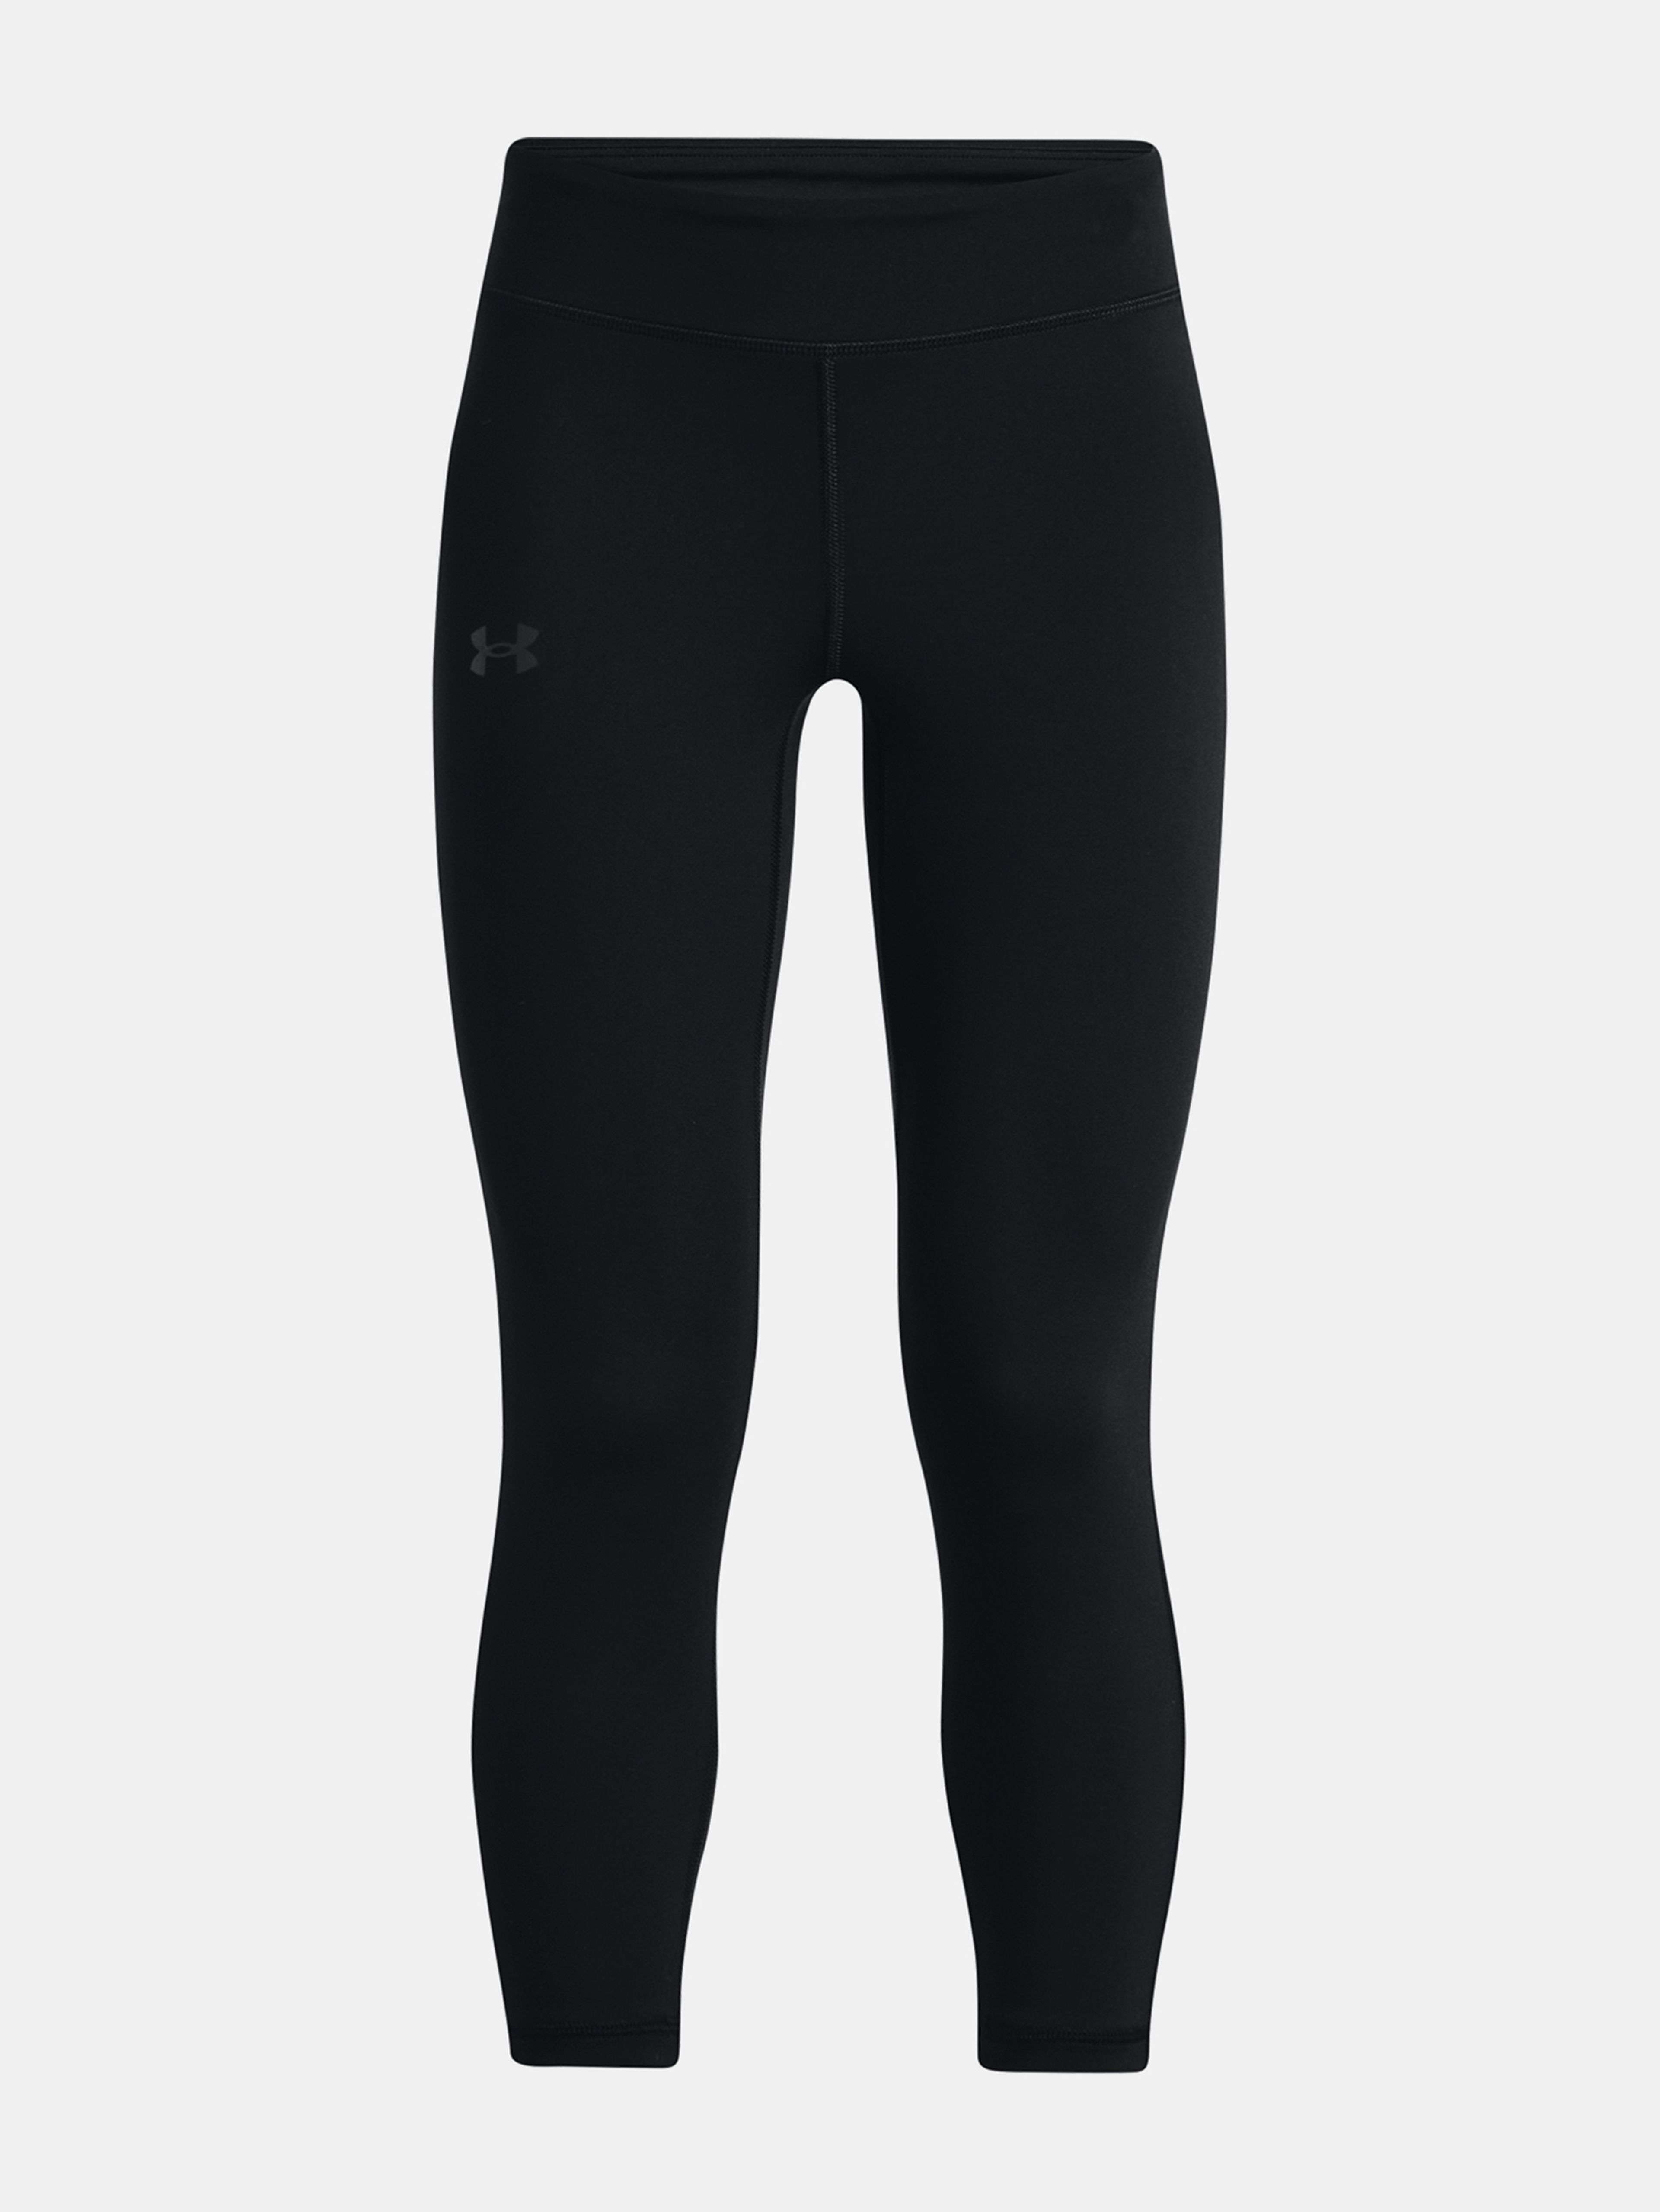 Under Armour Motion Solid Ankle Crop leggings